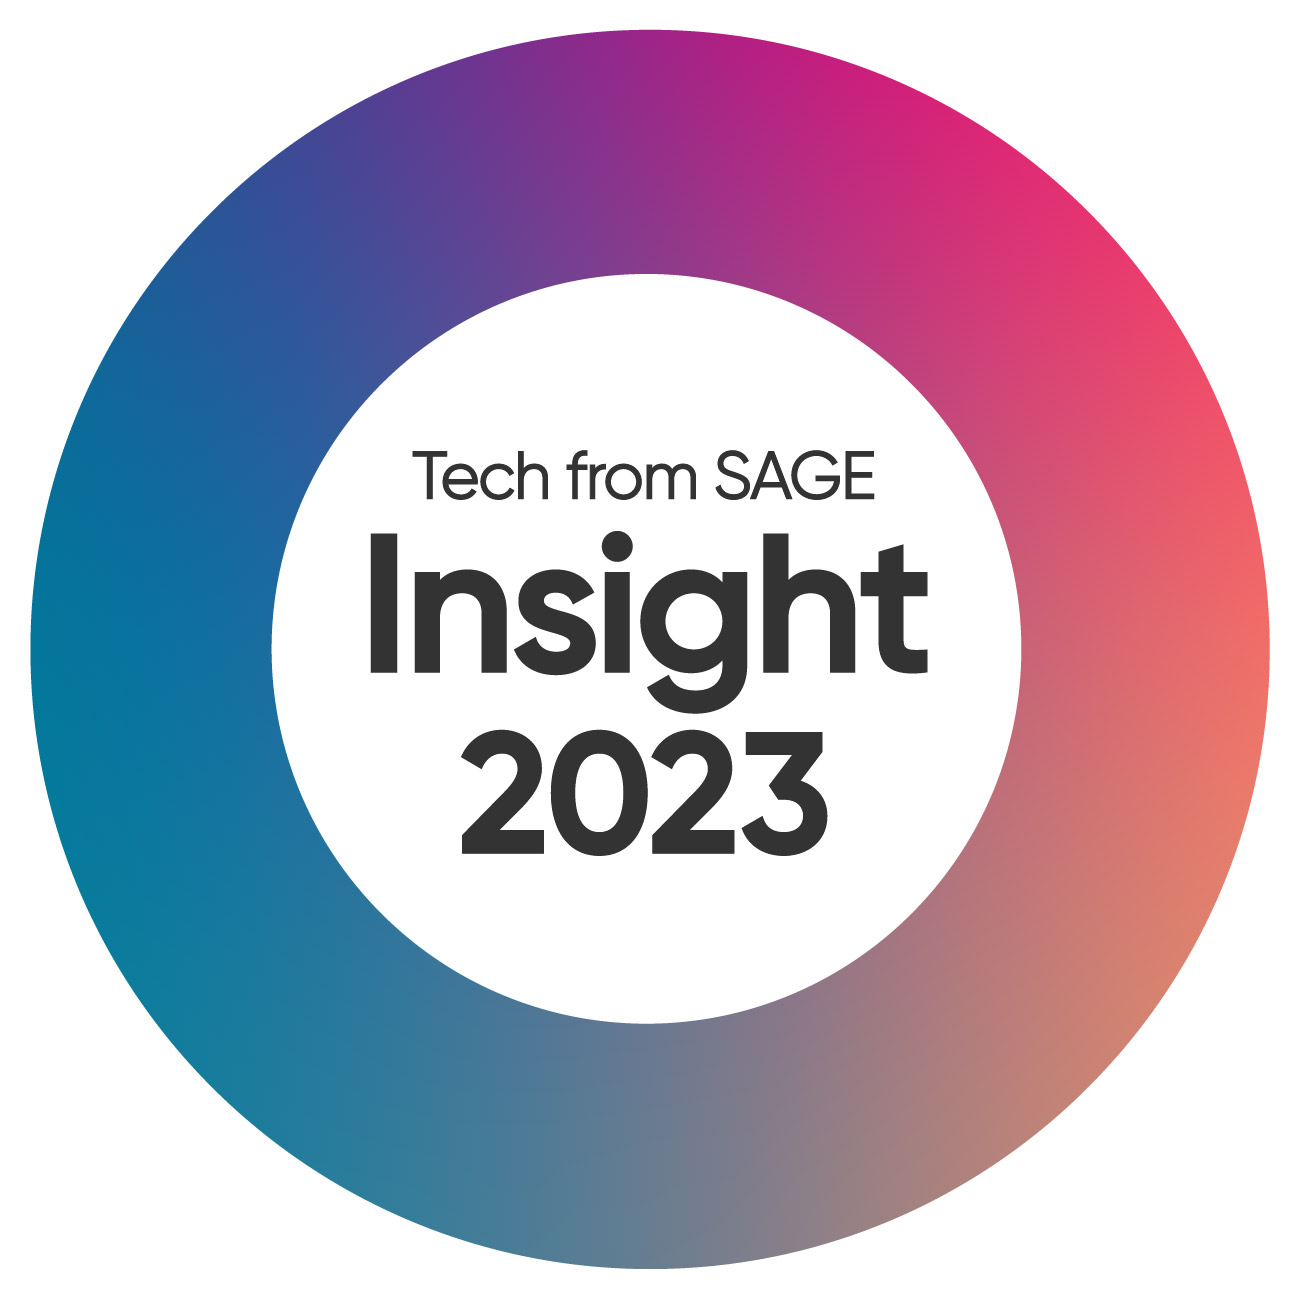 Tech from SAGE Insight 2023